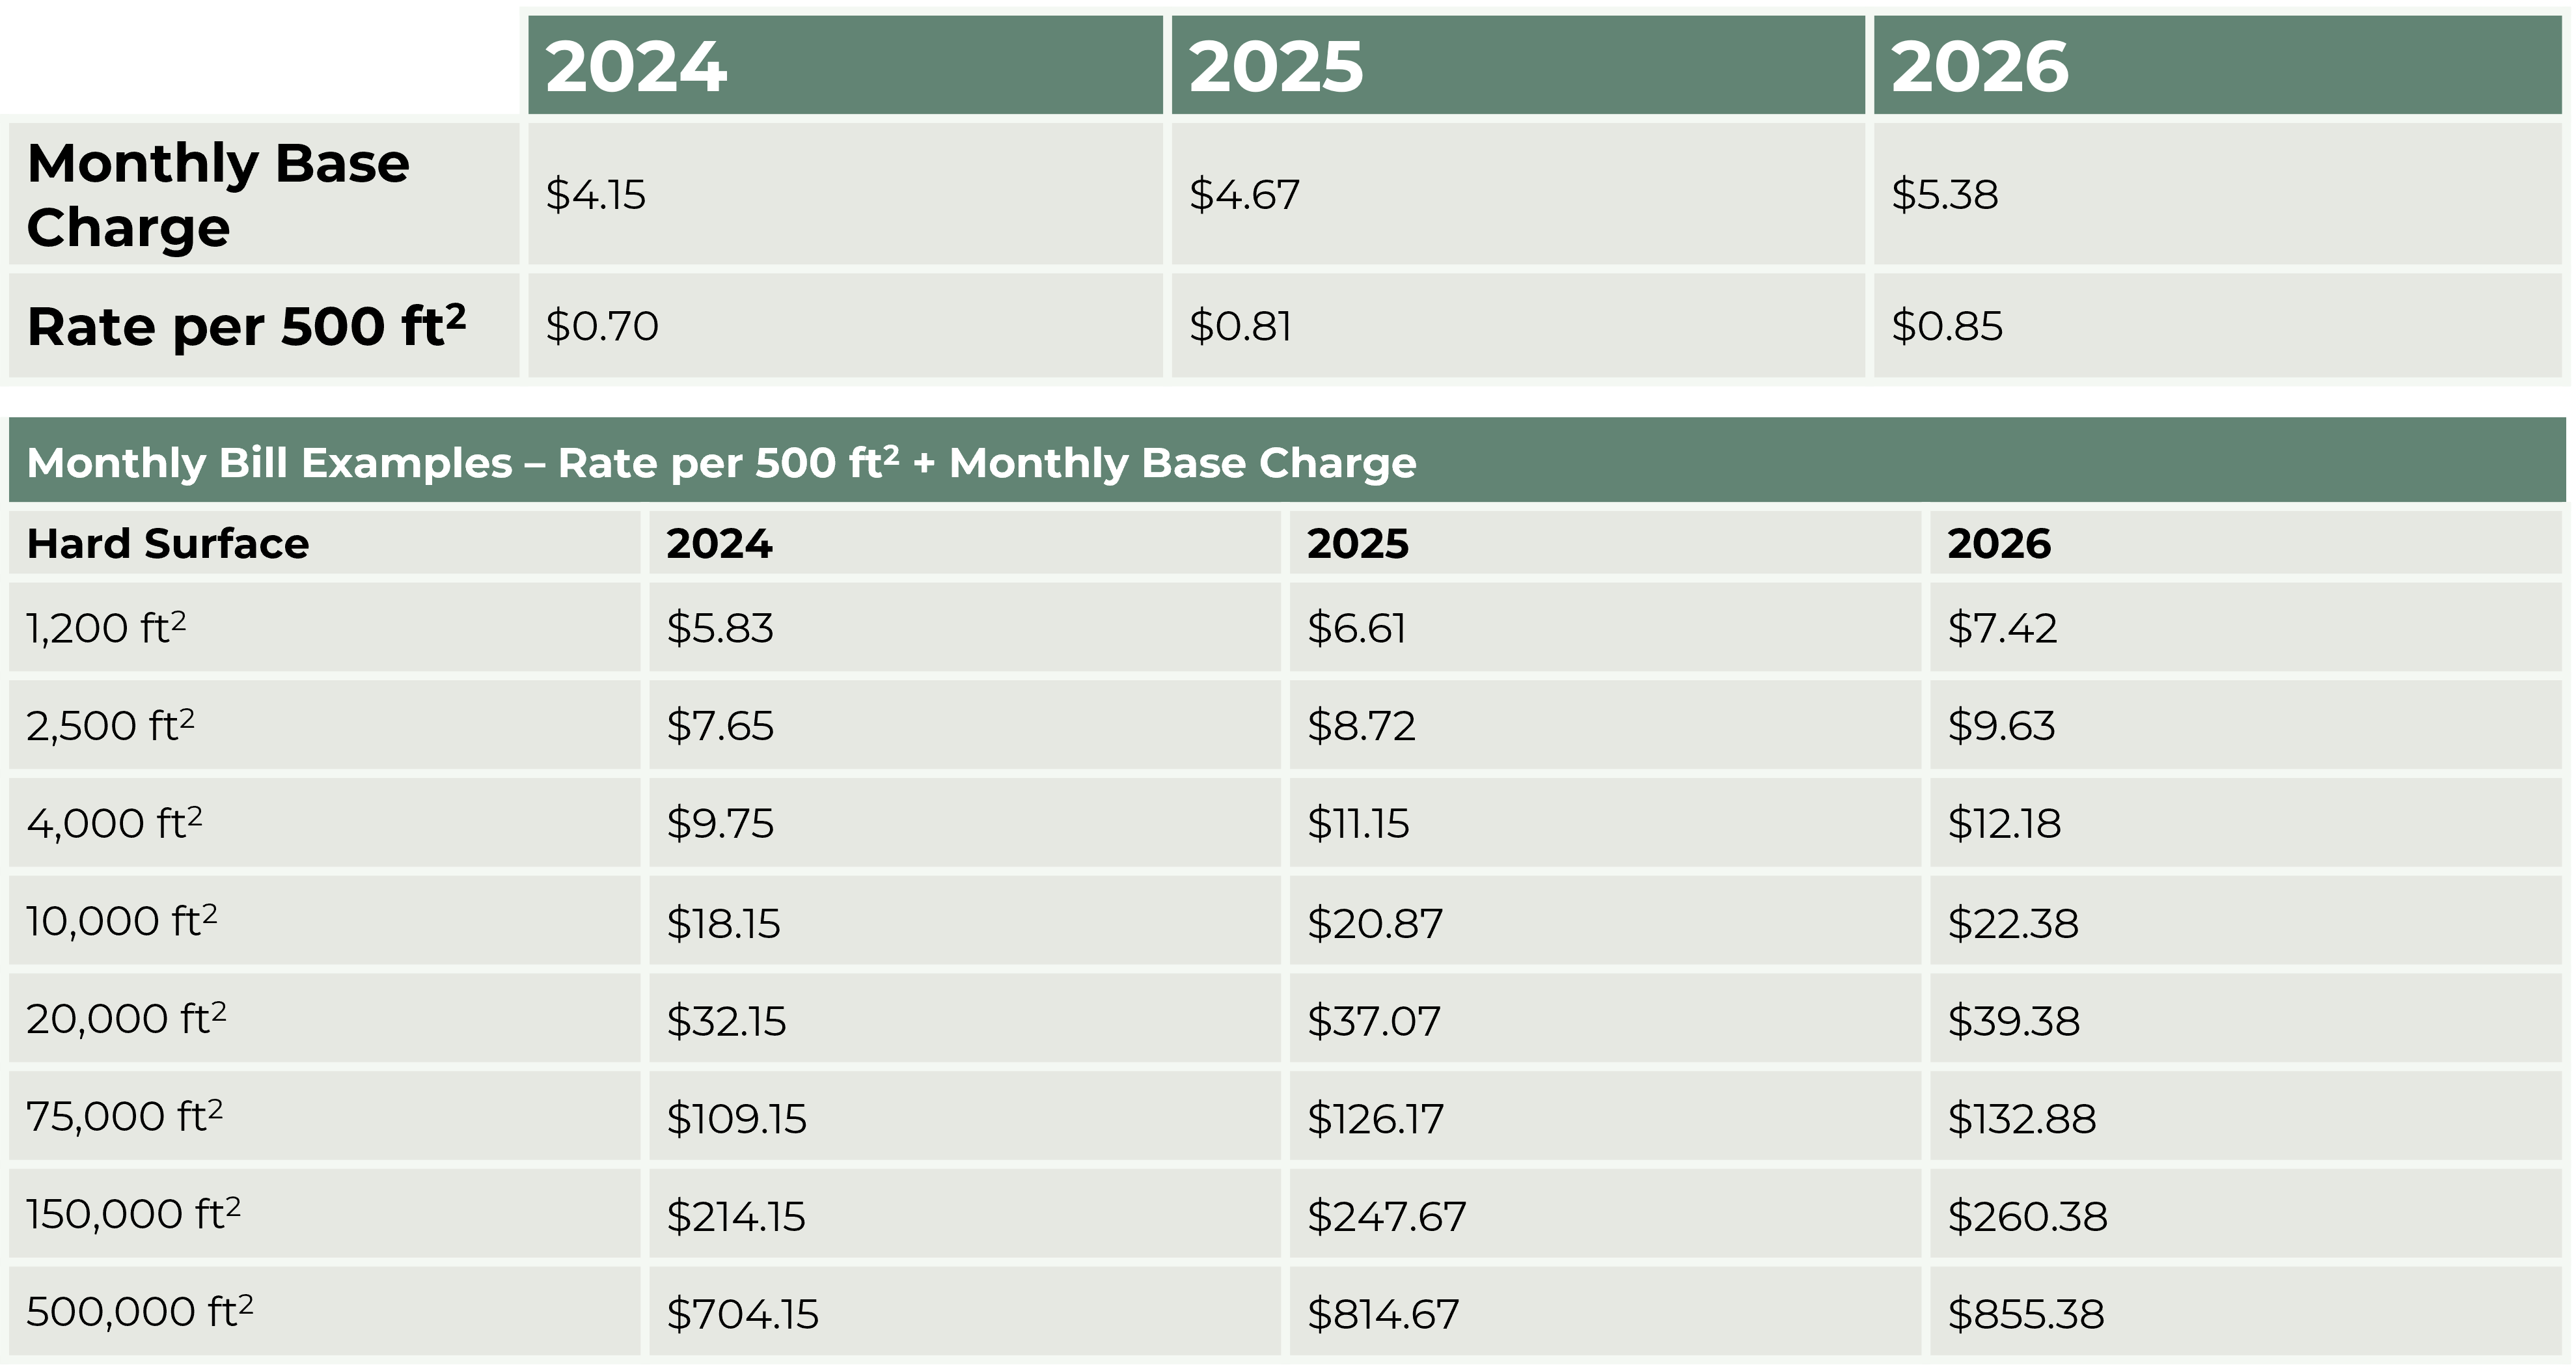 A table displaying stormwater rates for 2024, 2025, and 2026